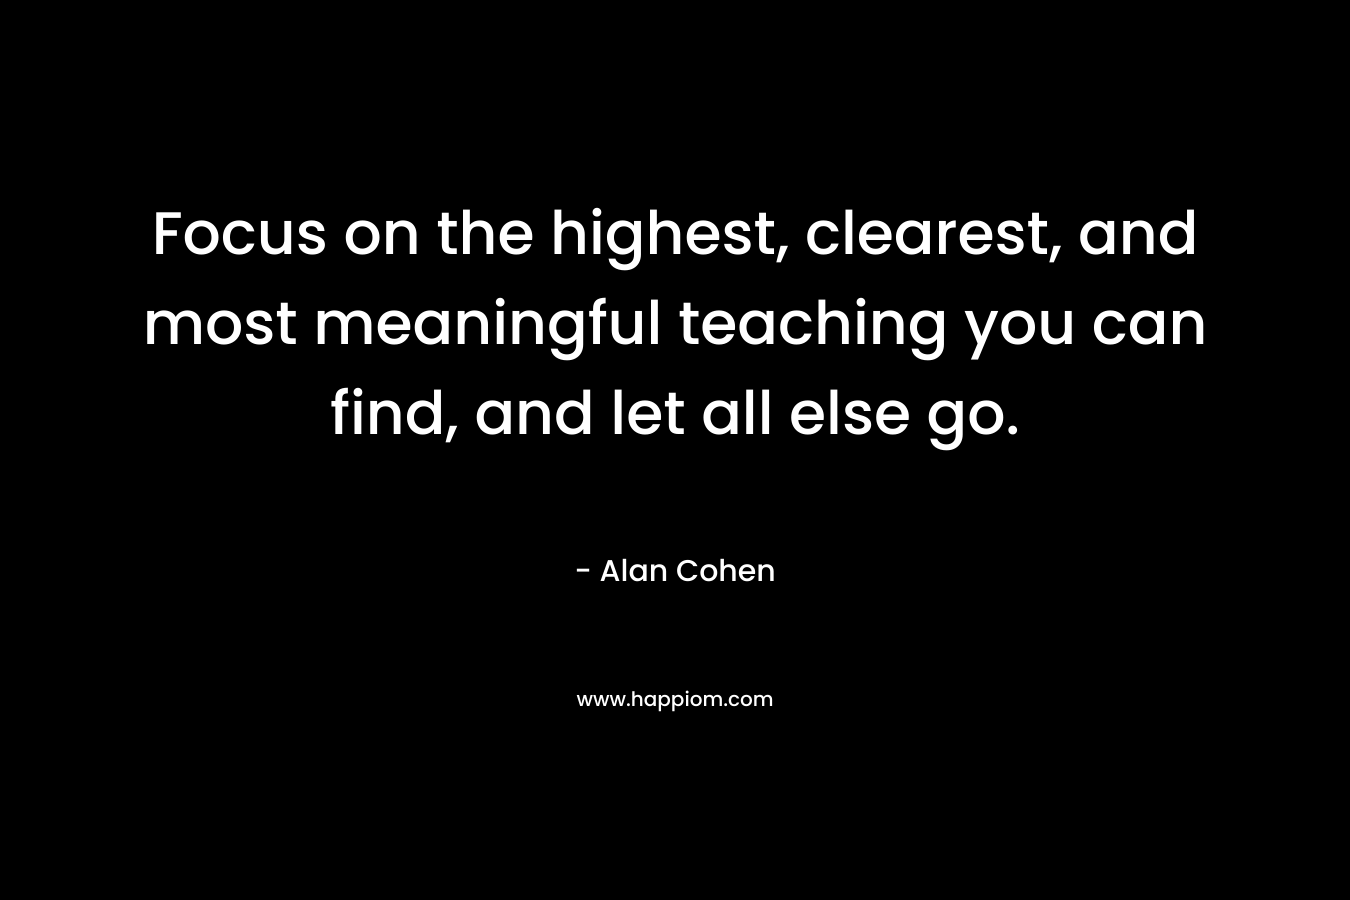 Focus on the highest, clearest, and most meaningful teaching you can find, and let all else go. – Alan Cohen